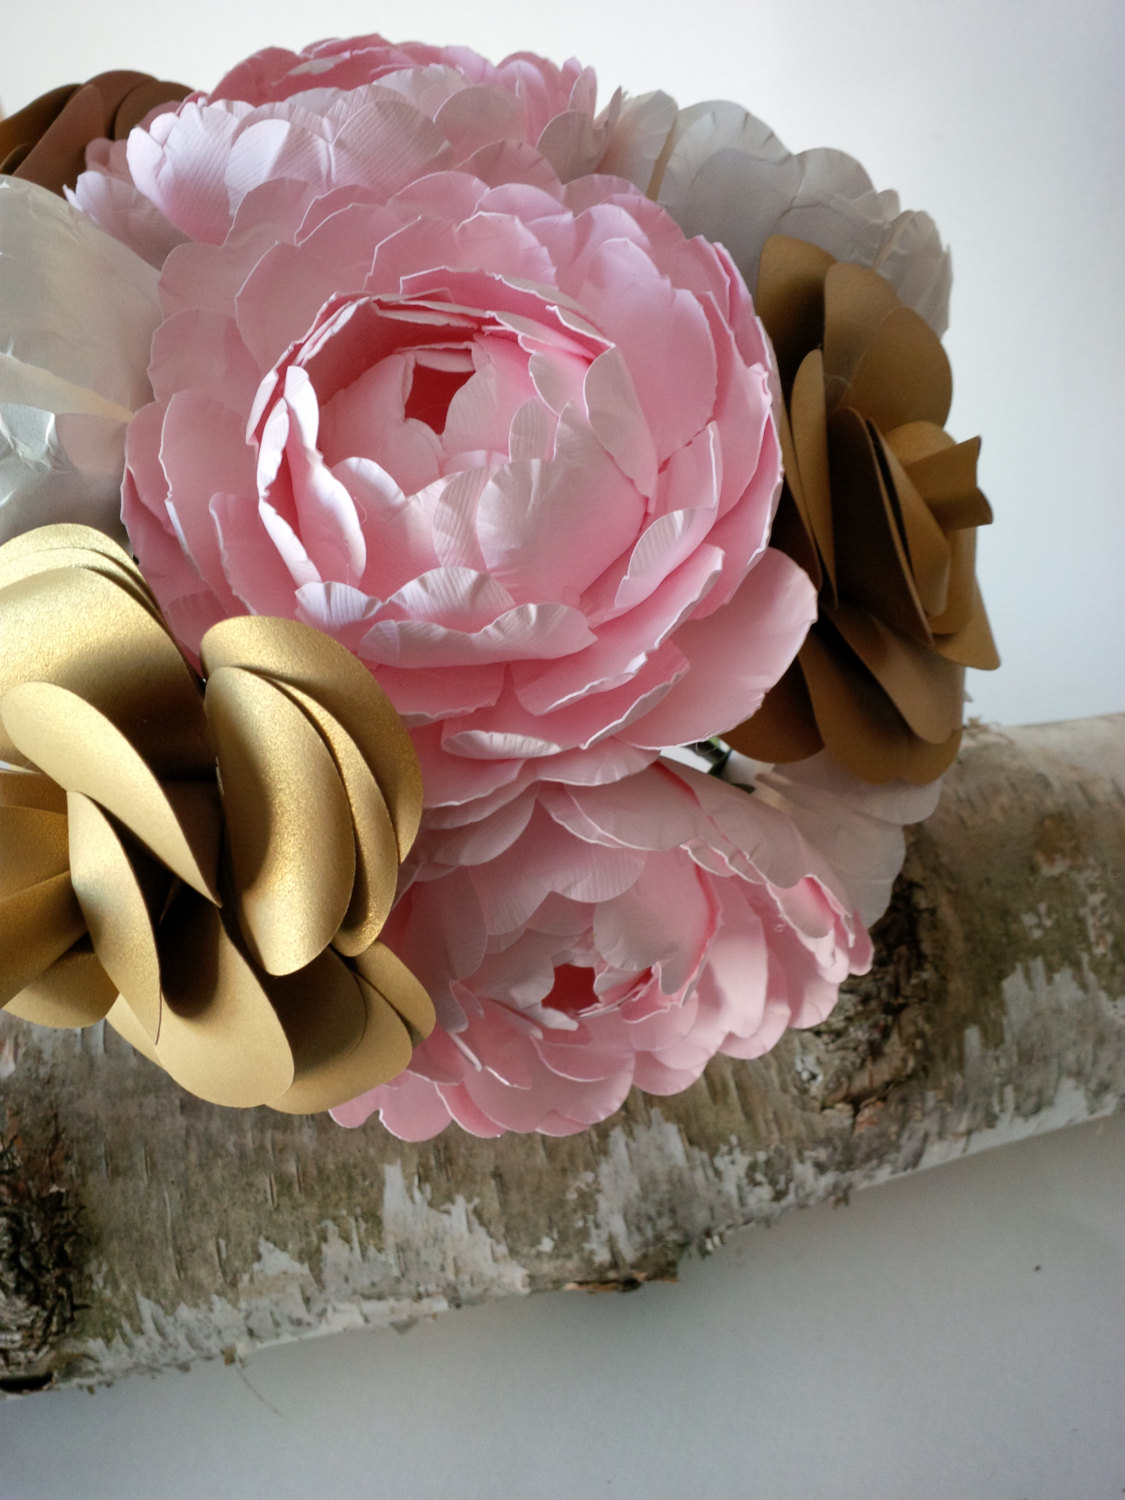 paper flower bouquets for weddings, backdrops, boutonnieres, paper flower decorations | by 2clvrdesigns on Etsy